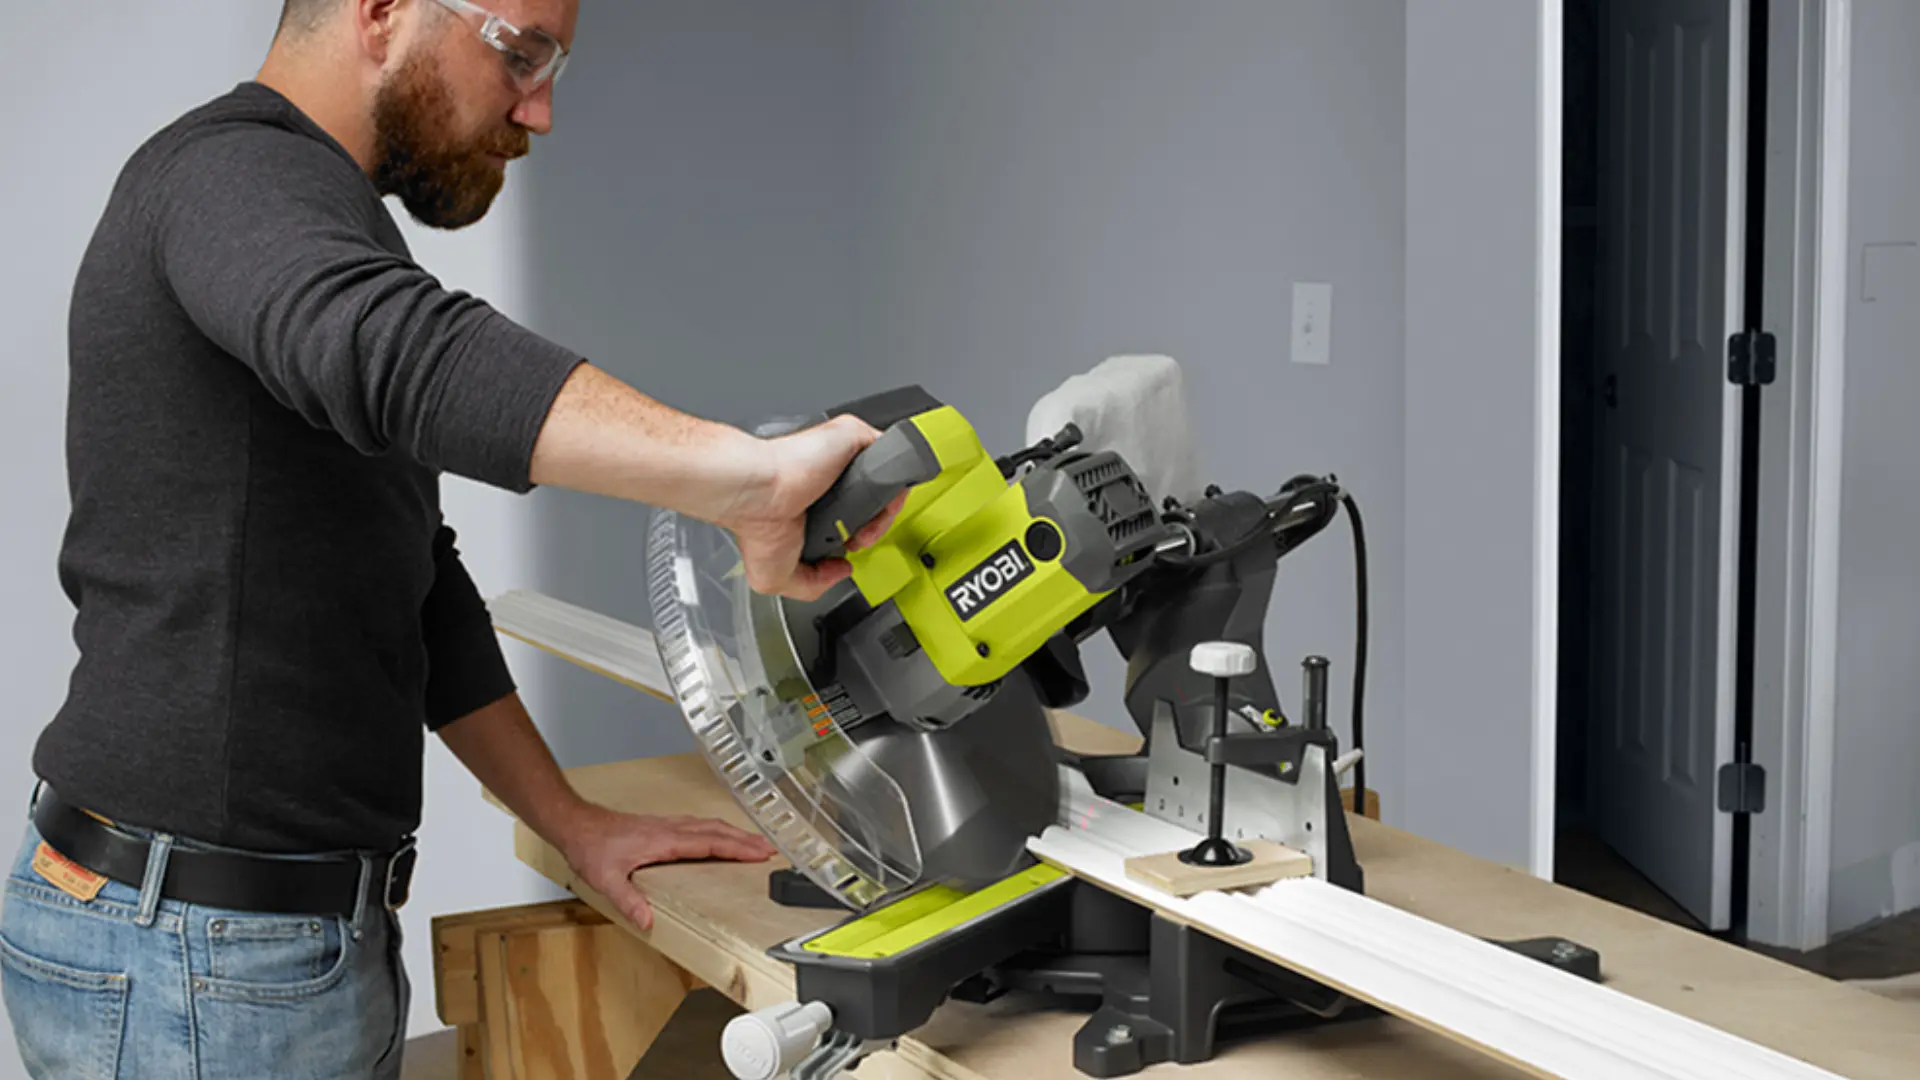 Safety Tips to Use a Miter Saw